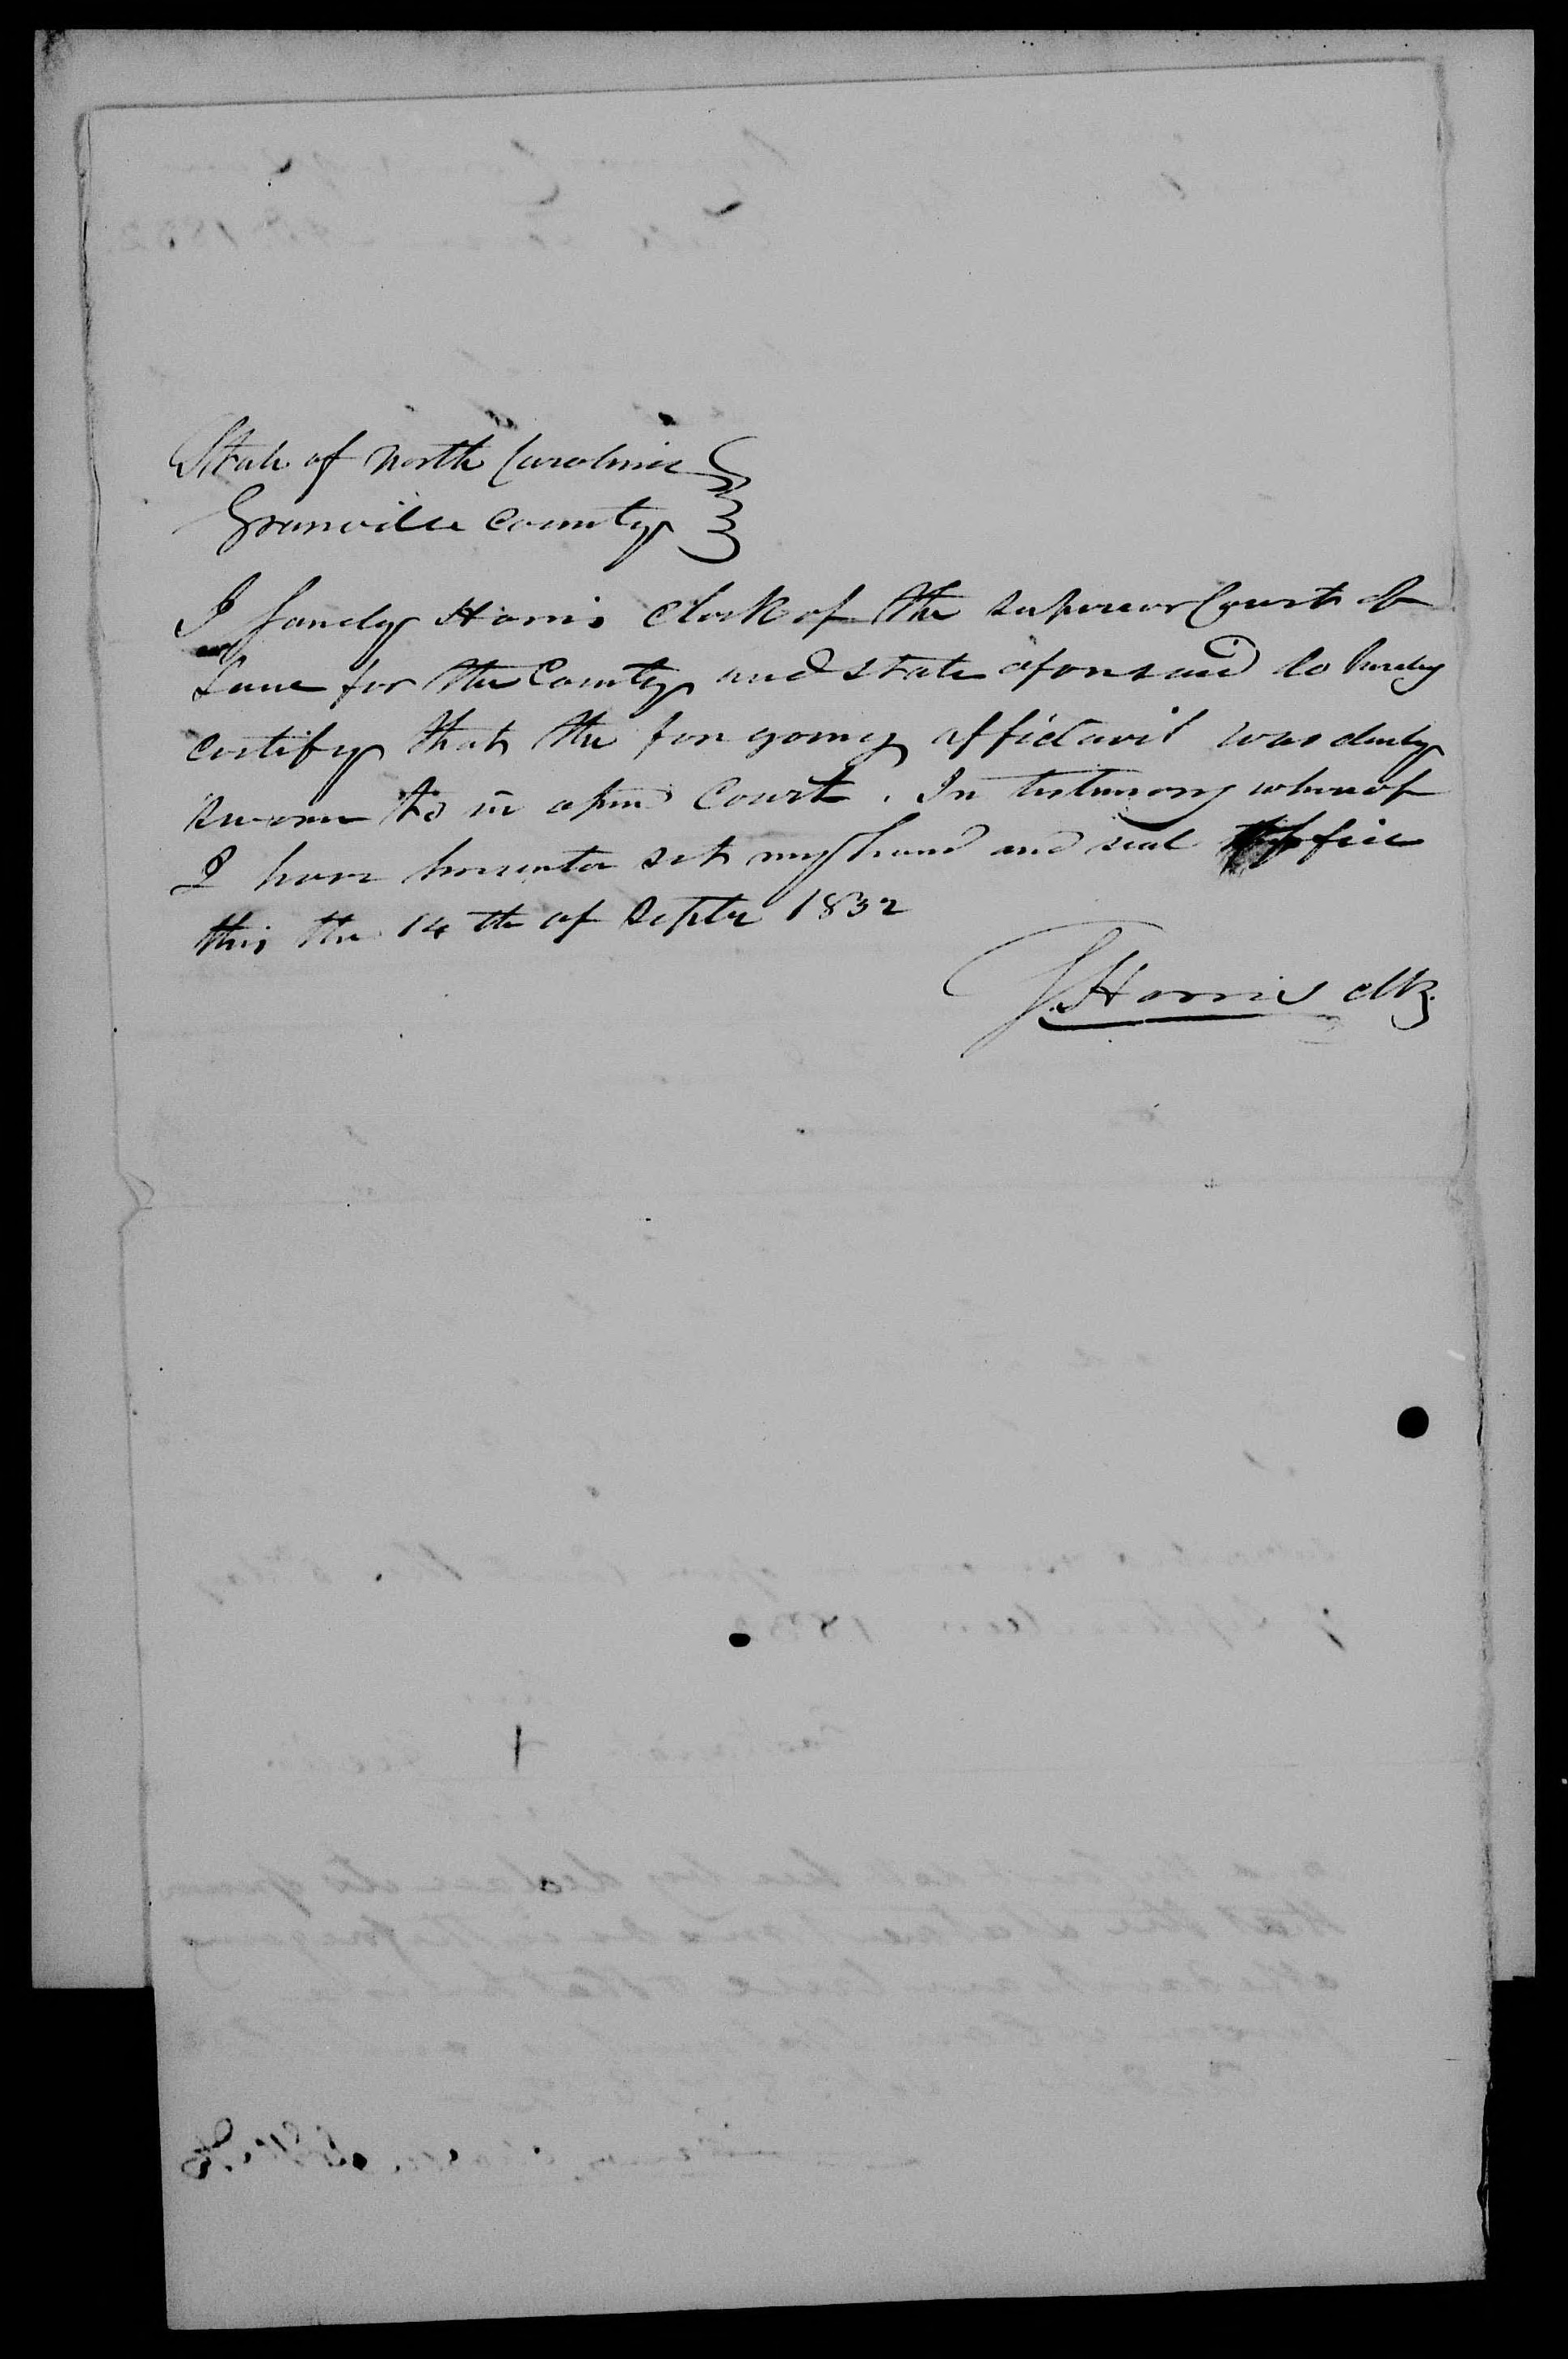 Affidavit of Zachariah Hester in support of a Pension Claim for William Taburn, 5 September 1832, page 2